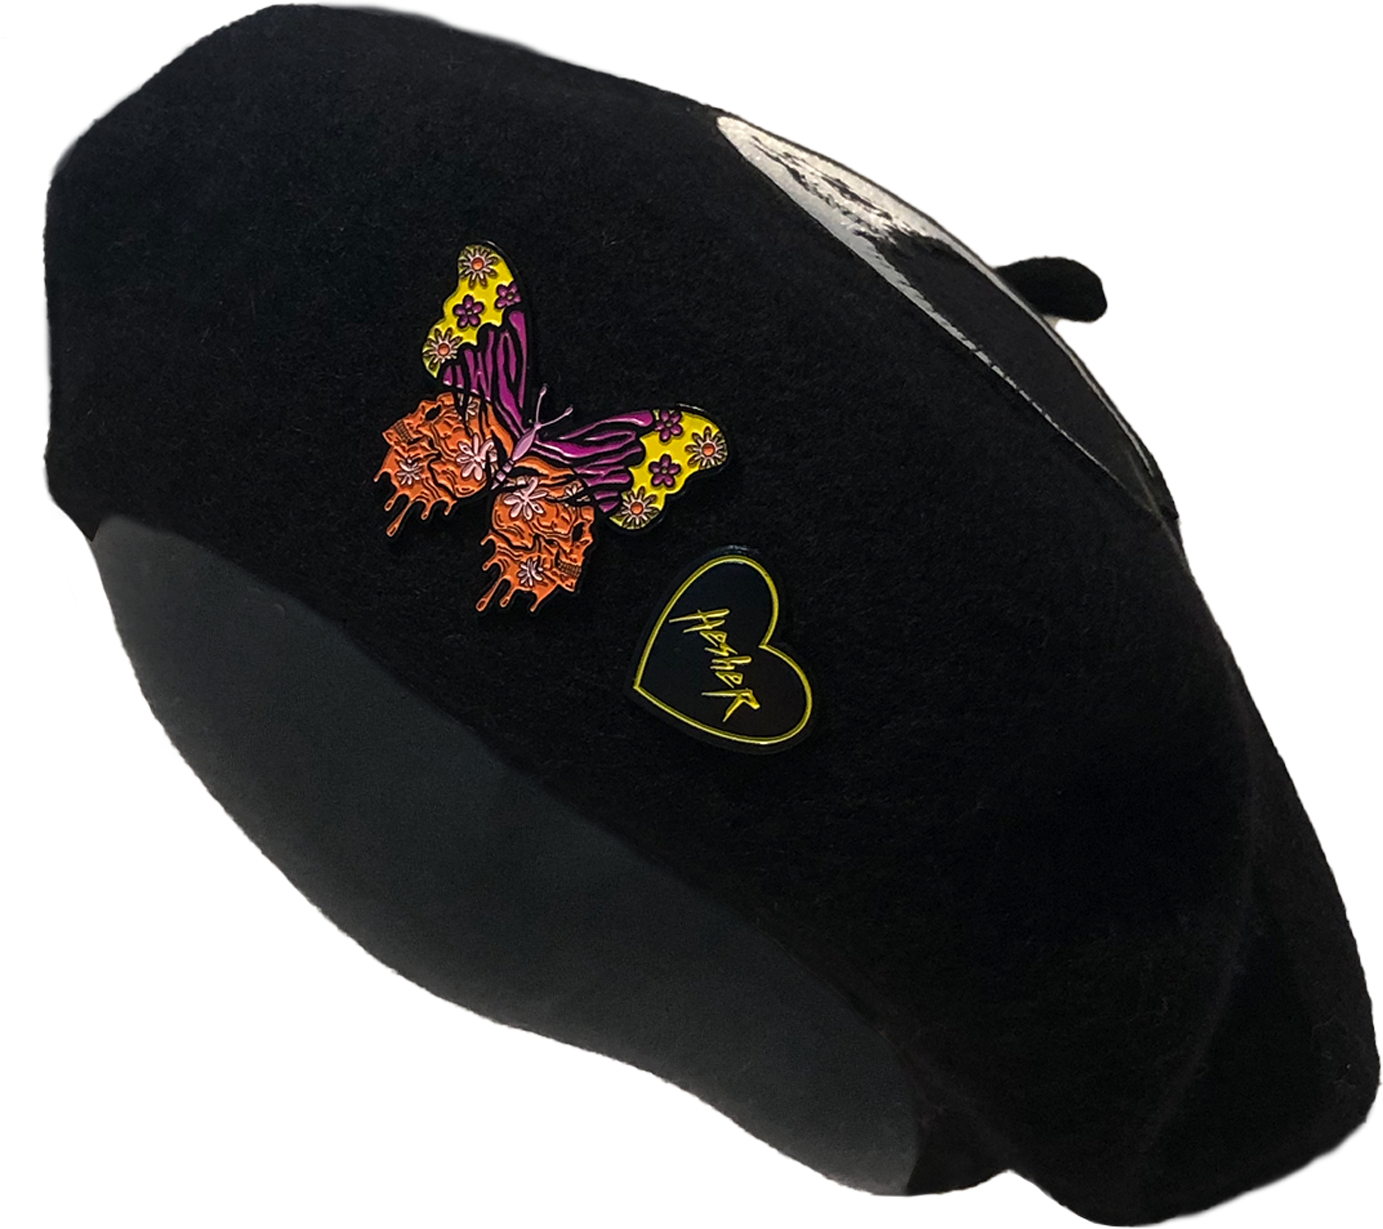 black wool beret with skull moon heart patch and colorful butterfly metal pin and black and yellow Hesher heart shaped metal pin